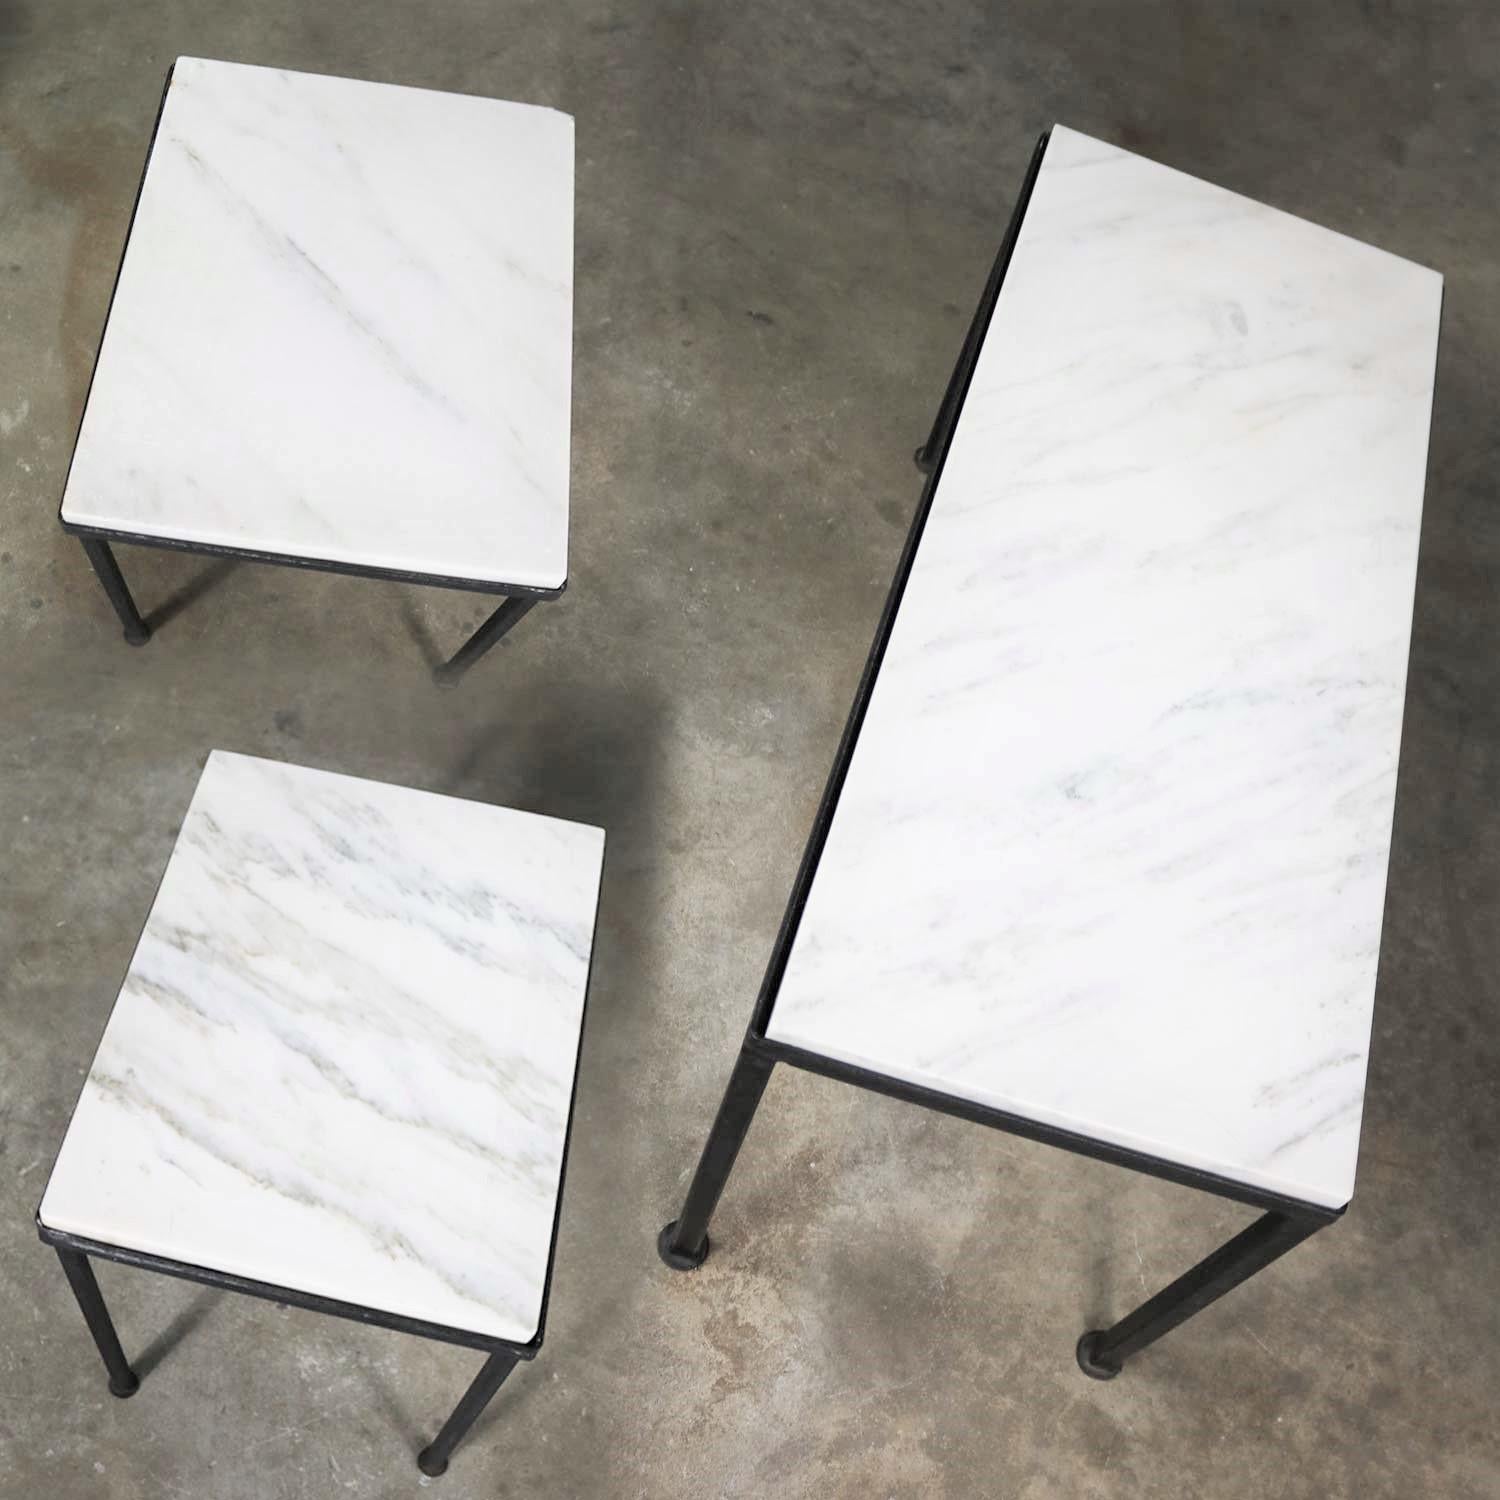 20th Century Trio of Small Black Iron Frame White Marble-Topped Tables for Indoors or Out